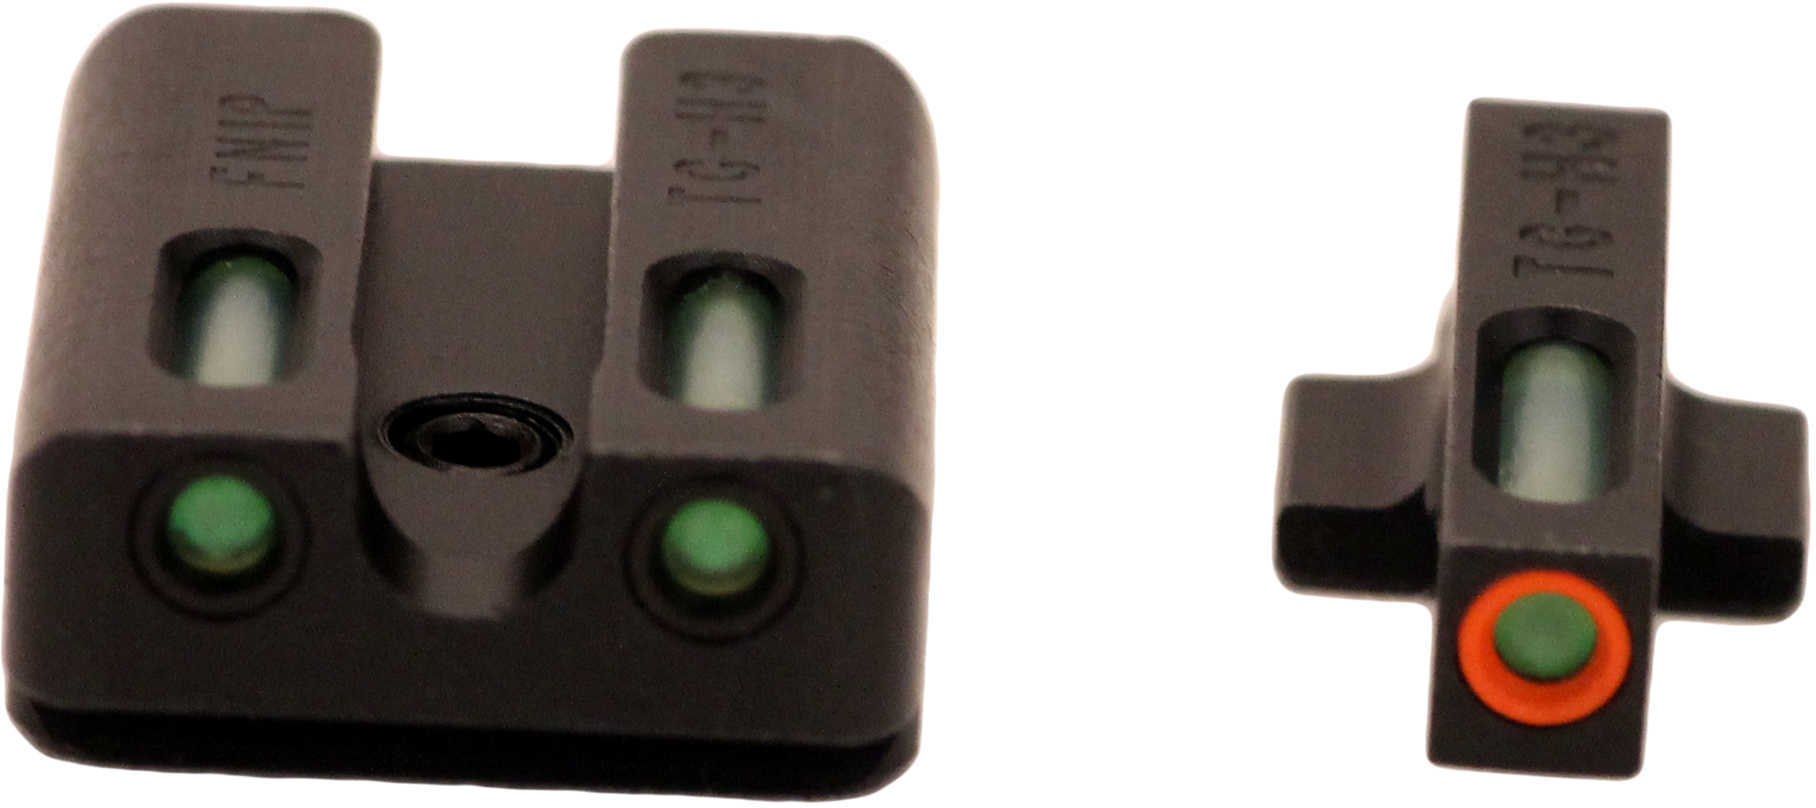 Truglo TFX Sight Set FNH FNP-40, FNX-40, and FNS-40 (Including Compact) Md: TG13FN2PC